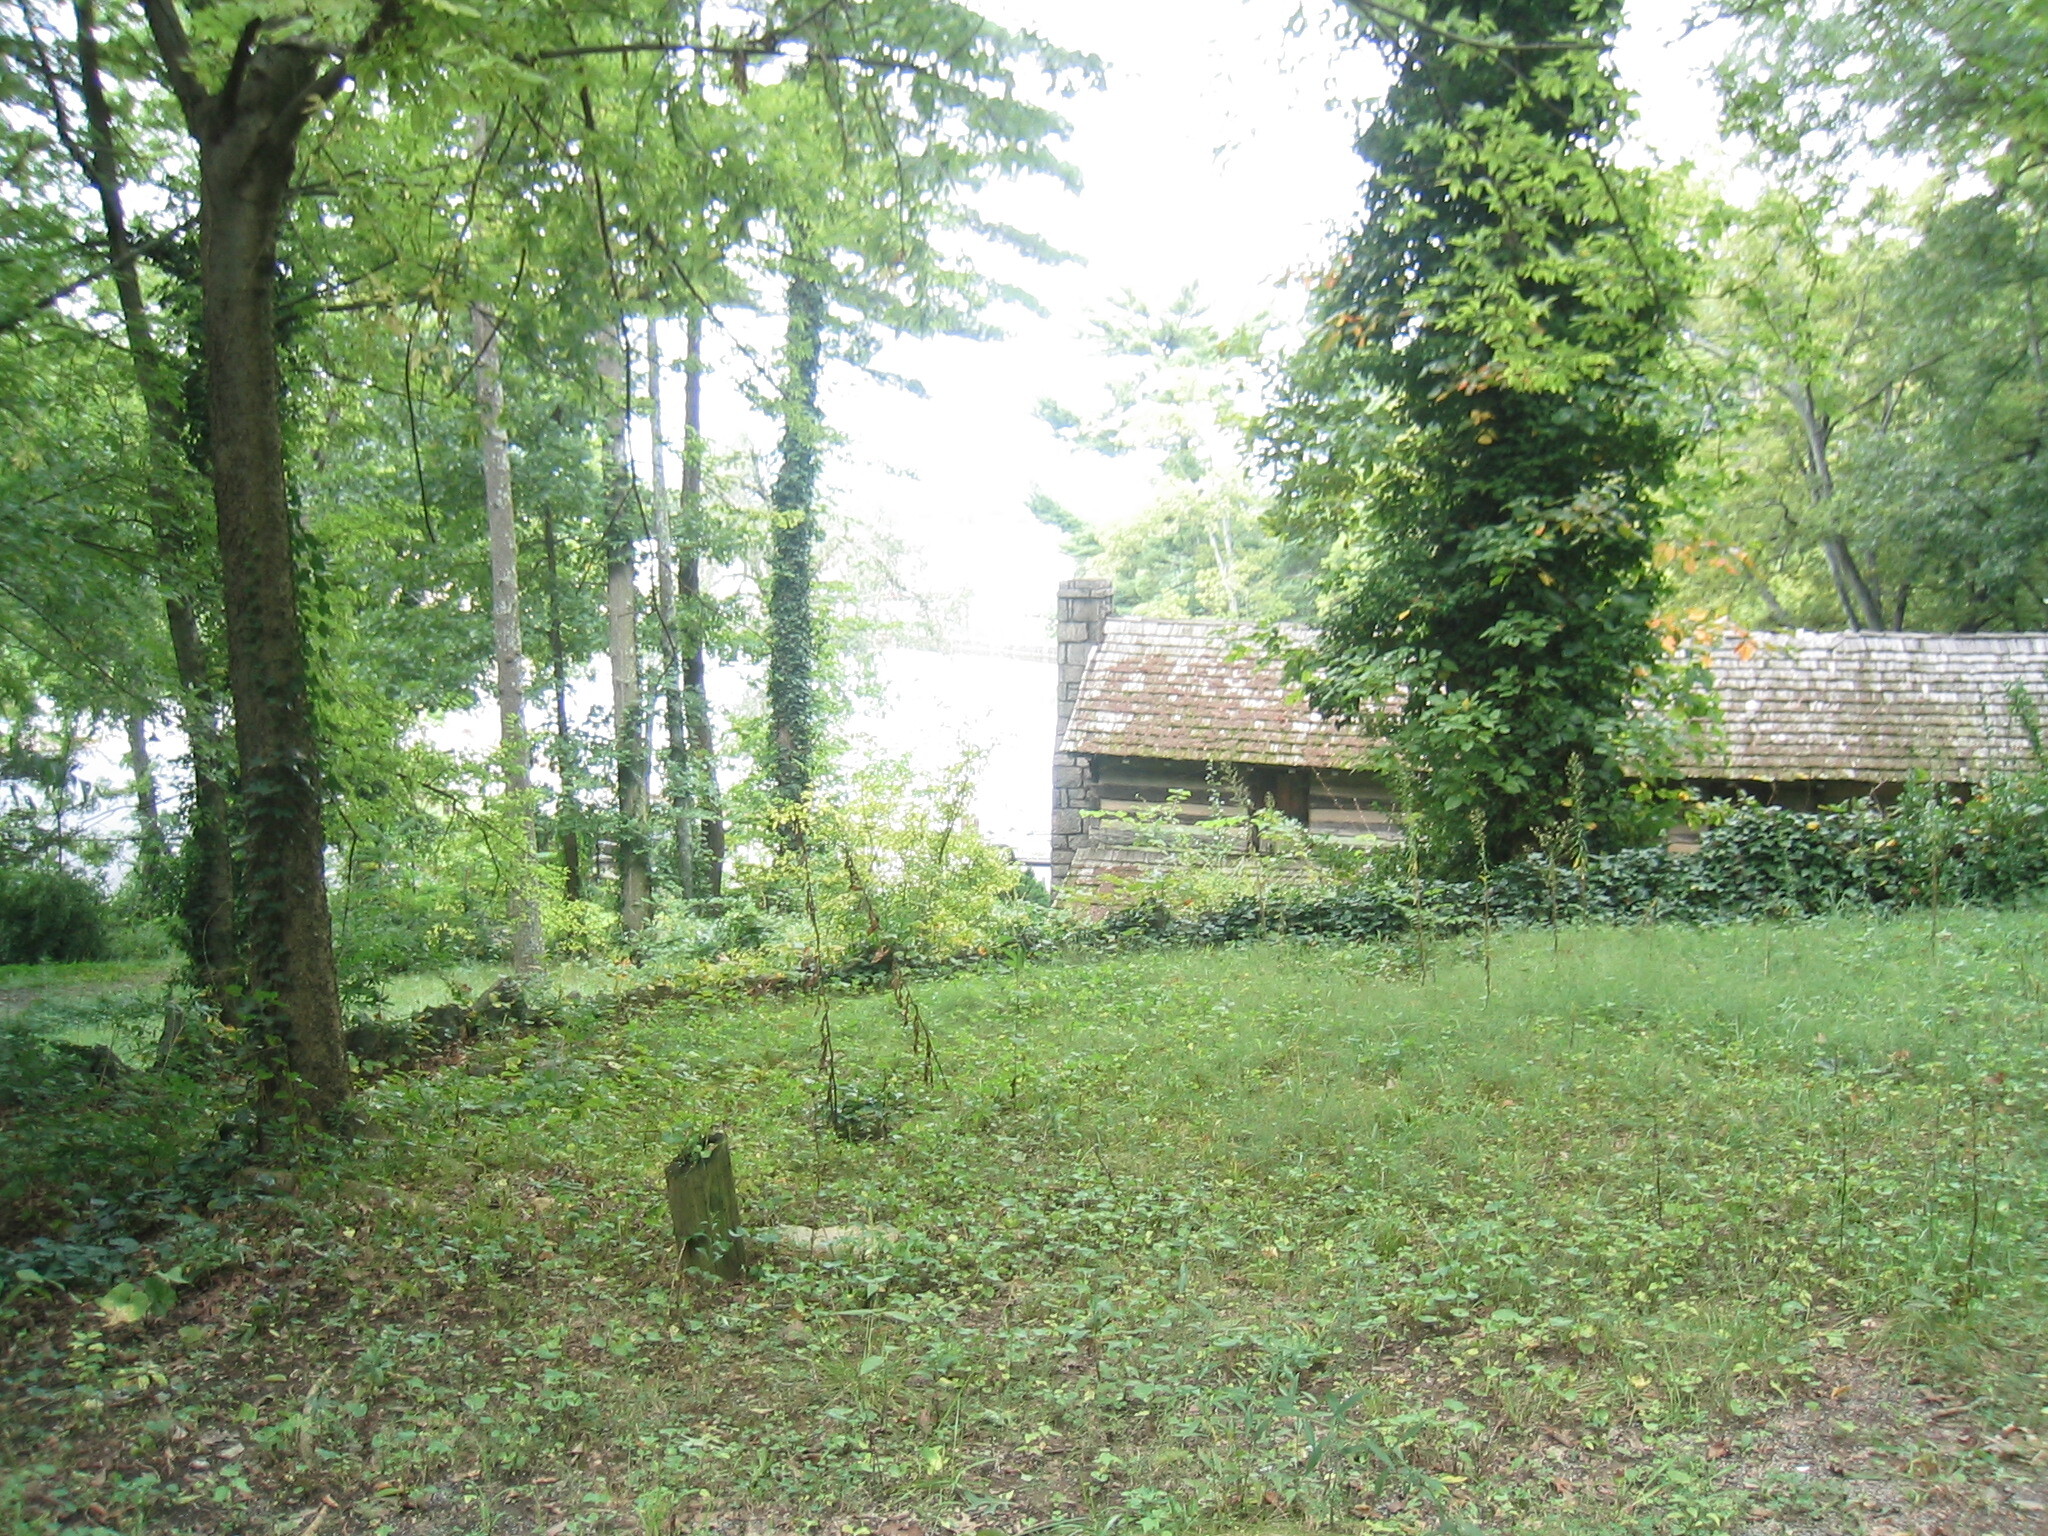 A view from the grassy hillside above the Chief John Ross House and Park in Rossville, Georgia